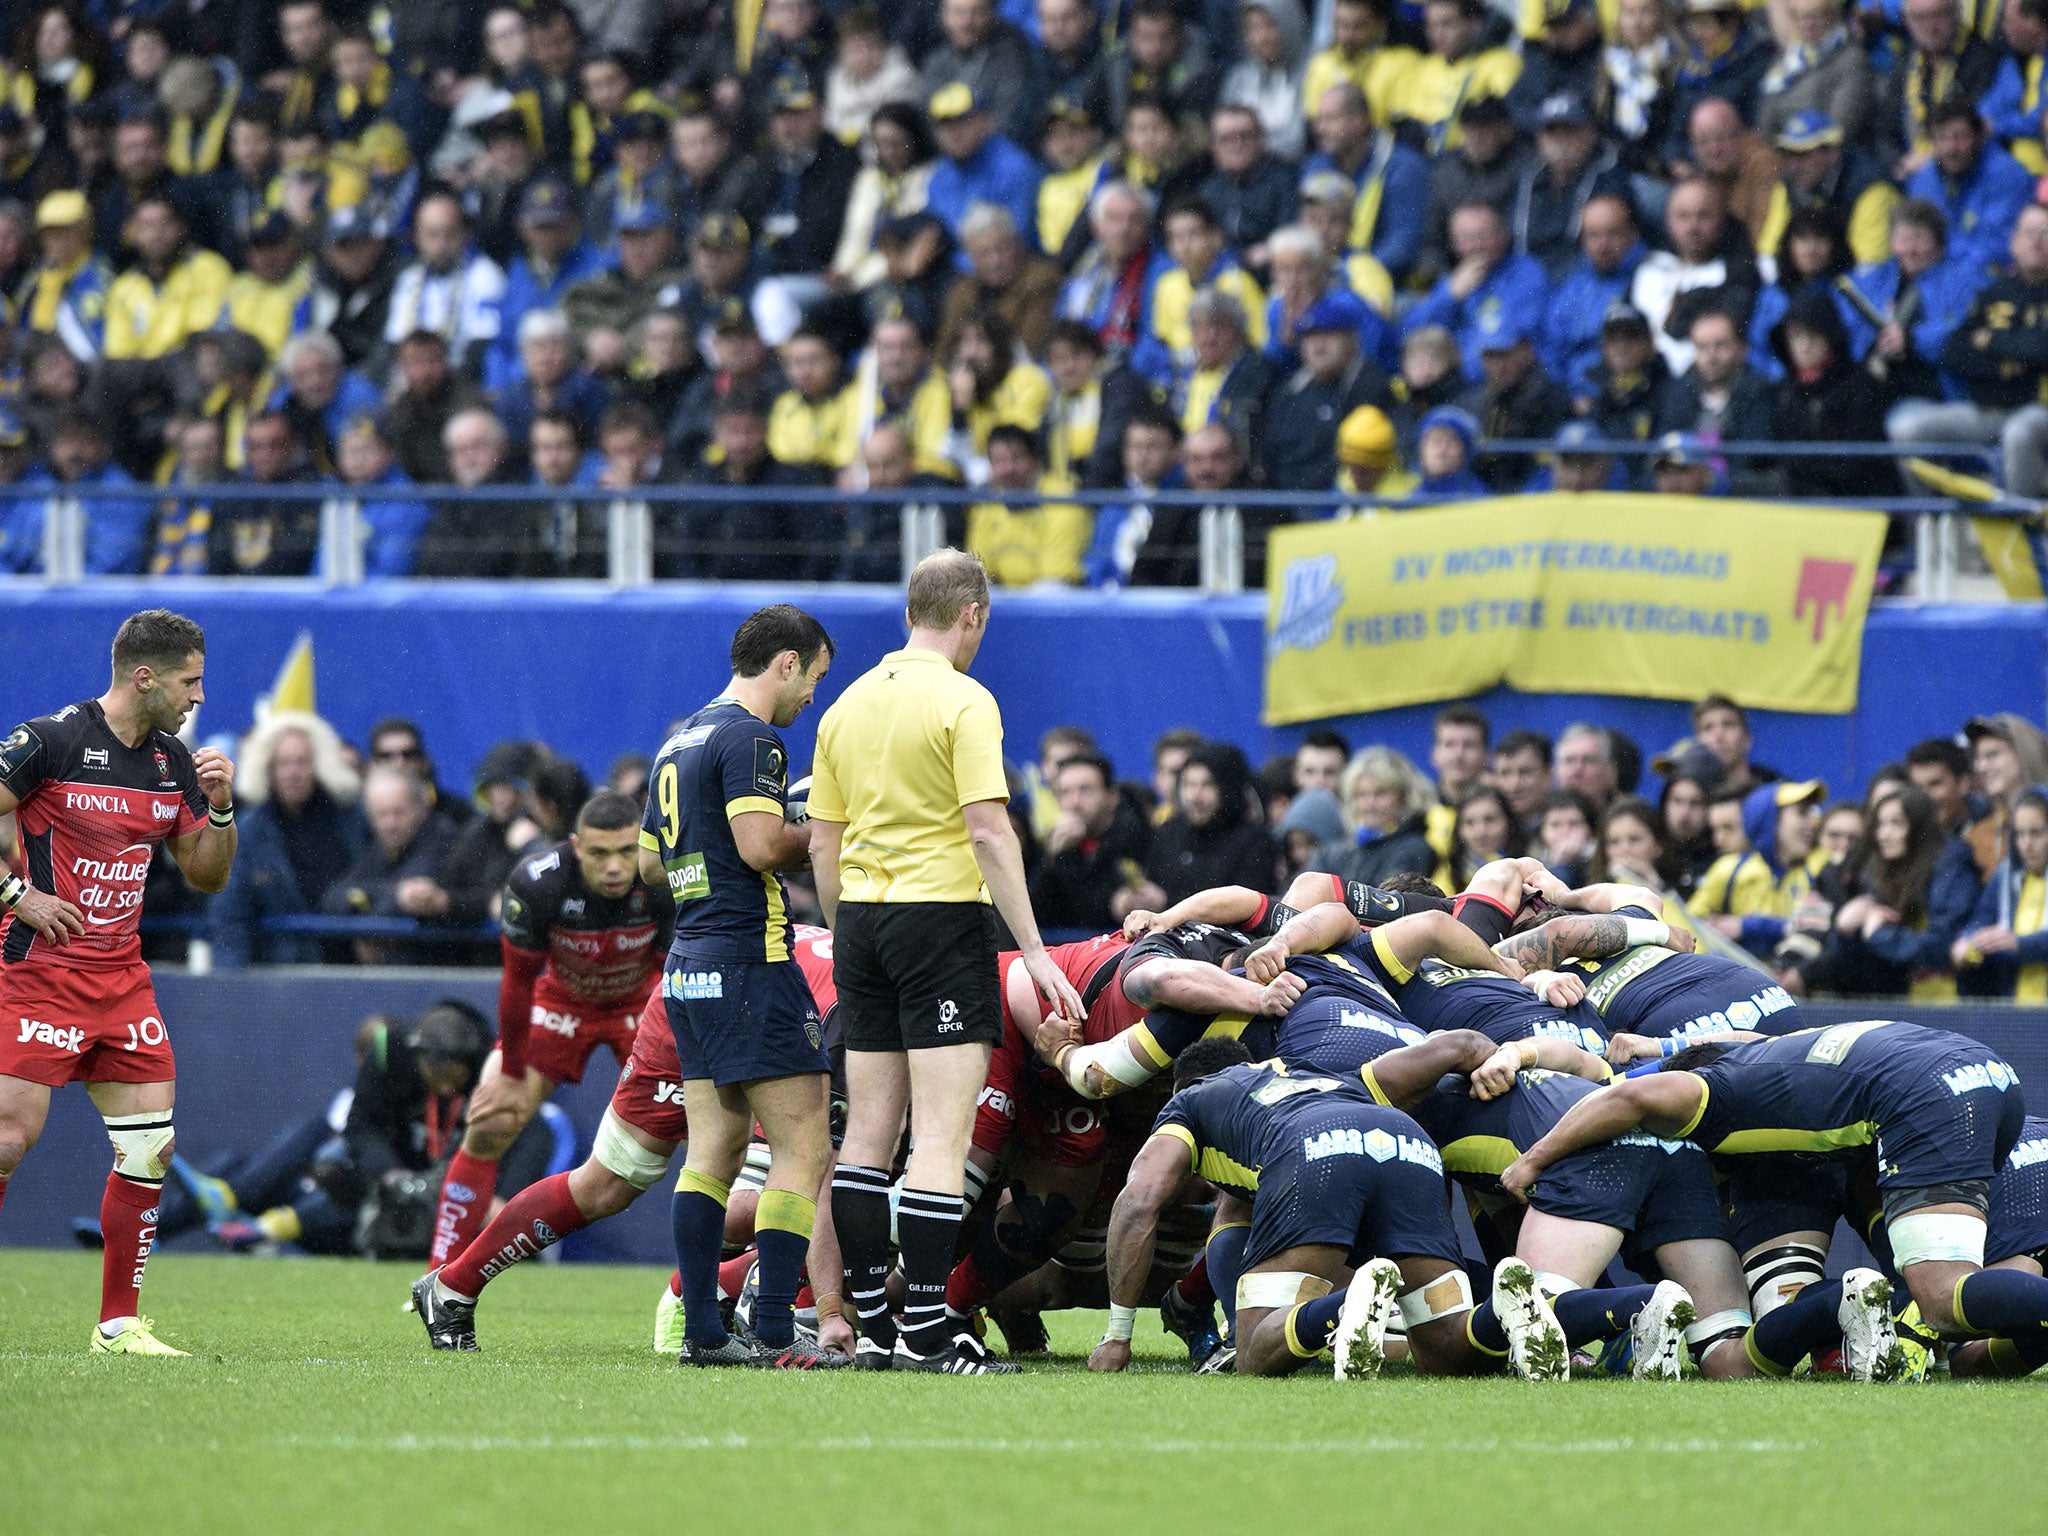 The two sides prepare for a scrum in the second half